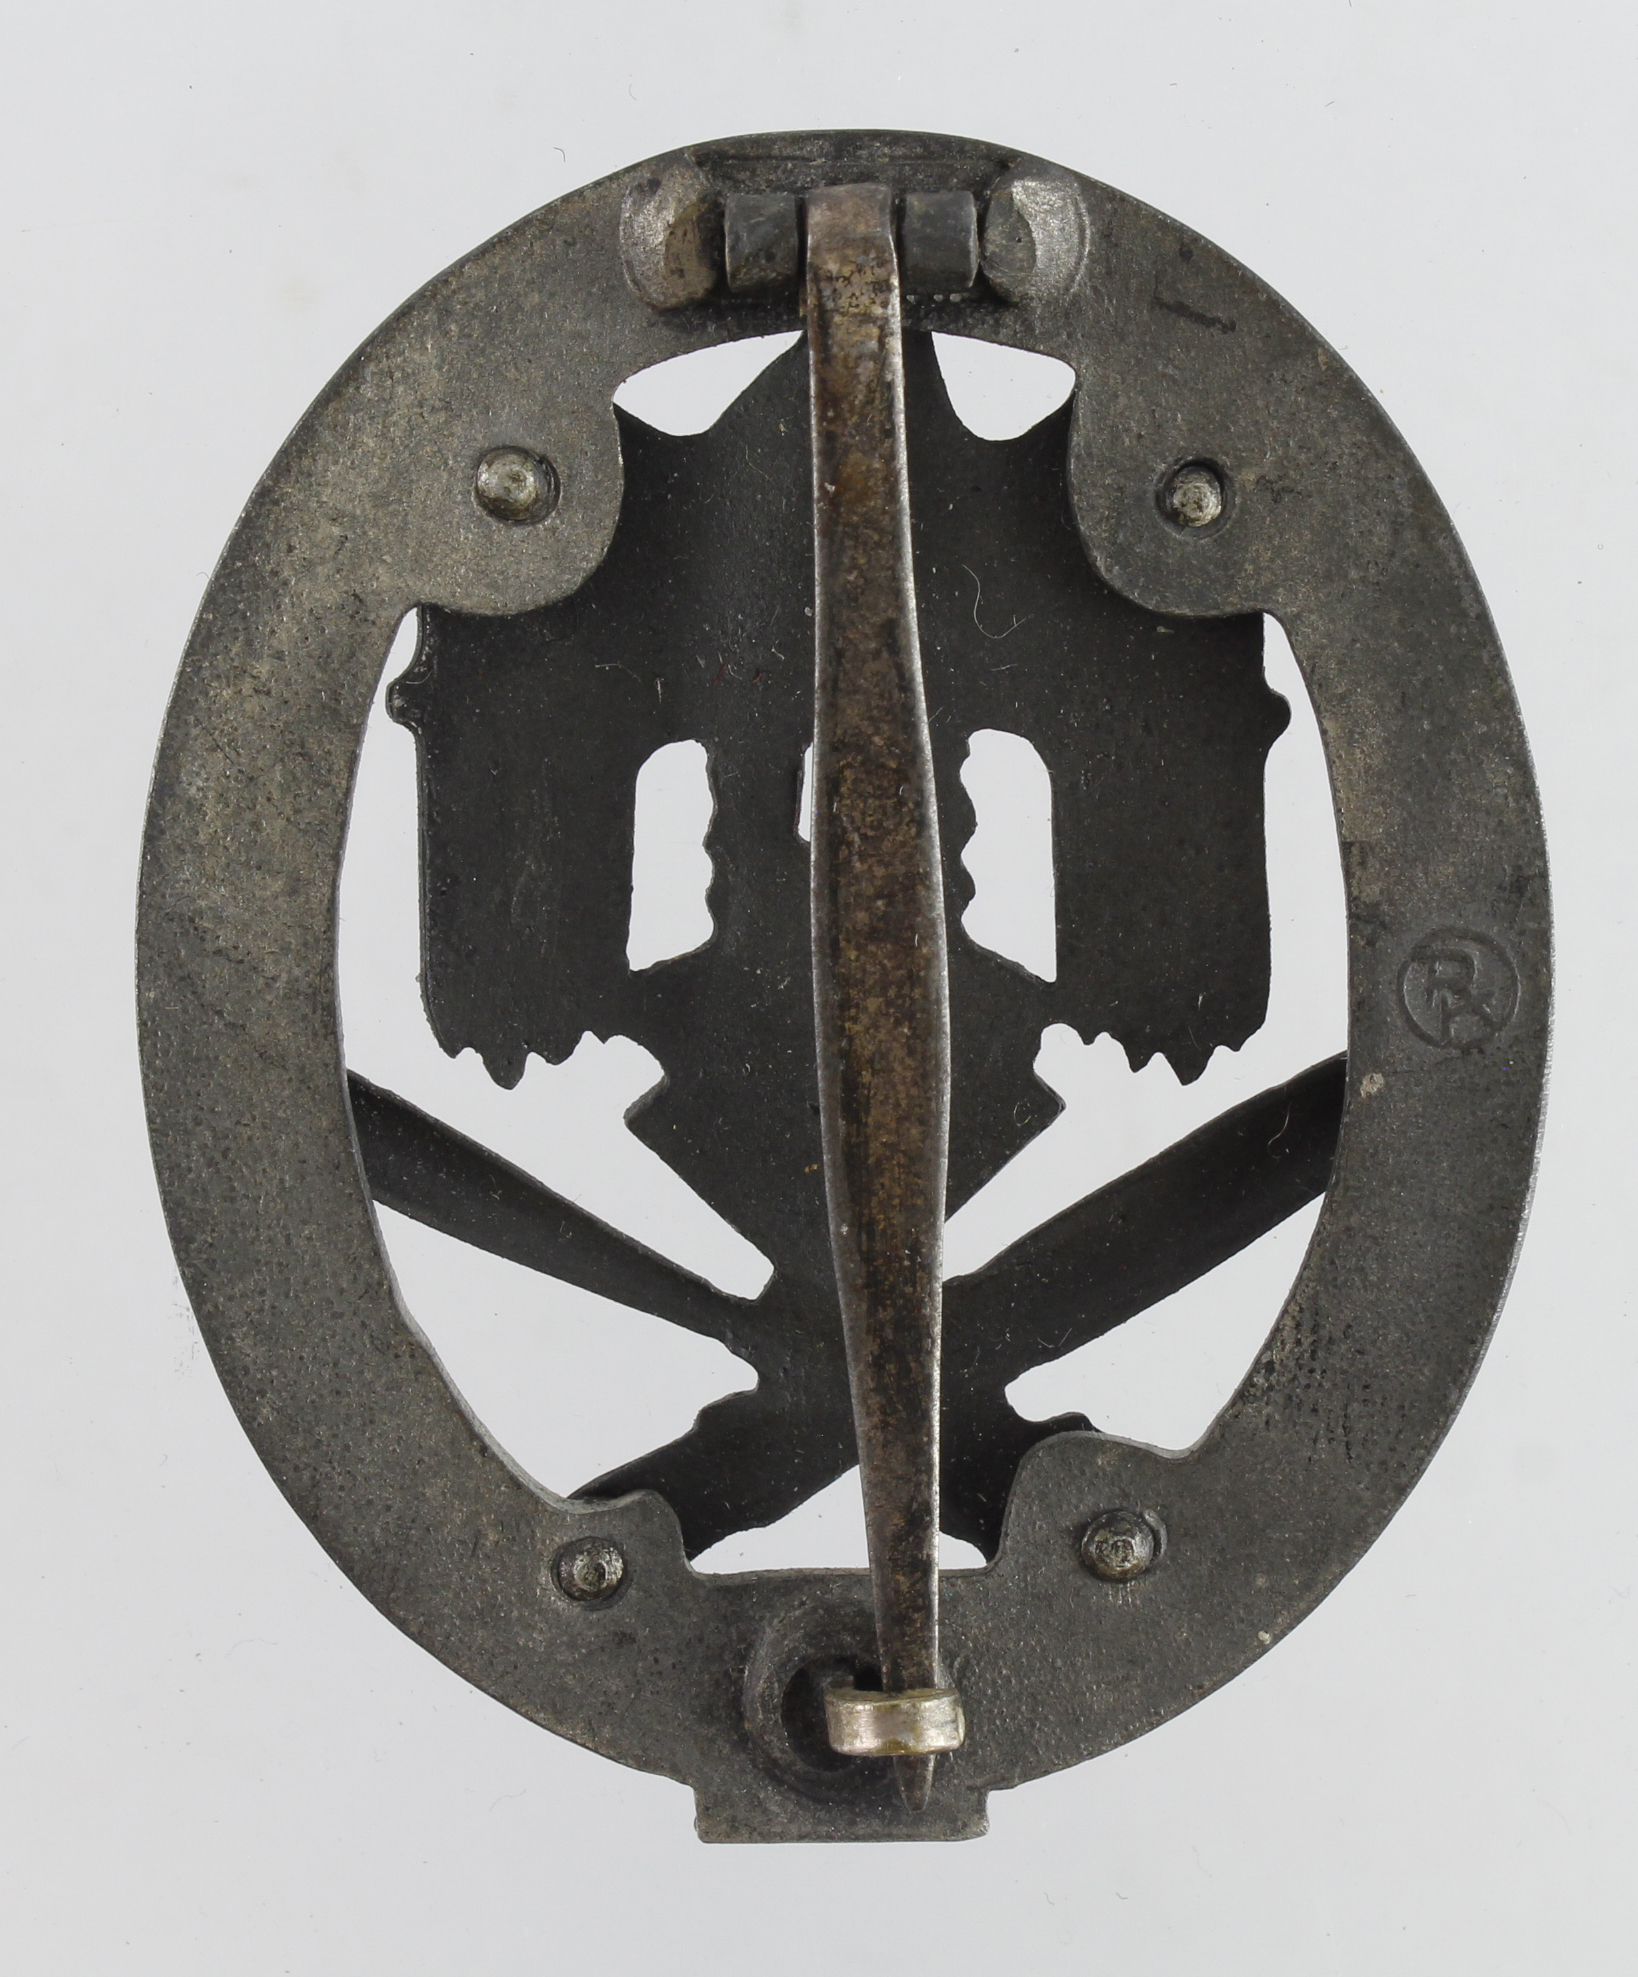 German from a one owner collection a Wehrmacht war badge General Assault badge "25" by "RK". - Image 2 of 2